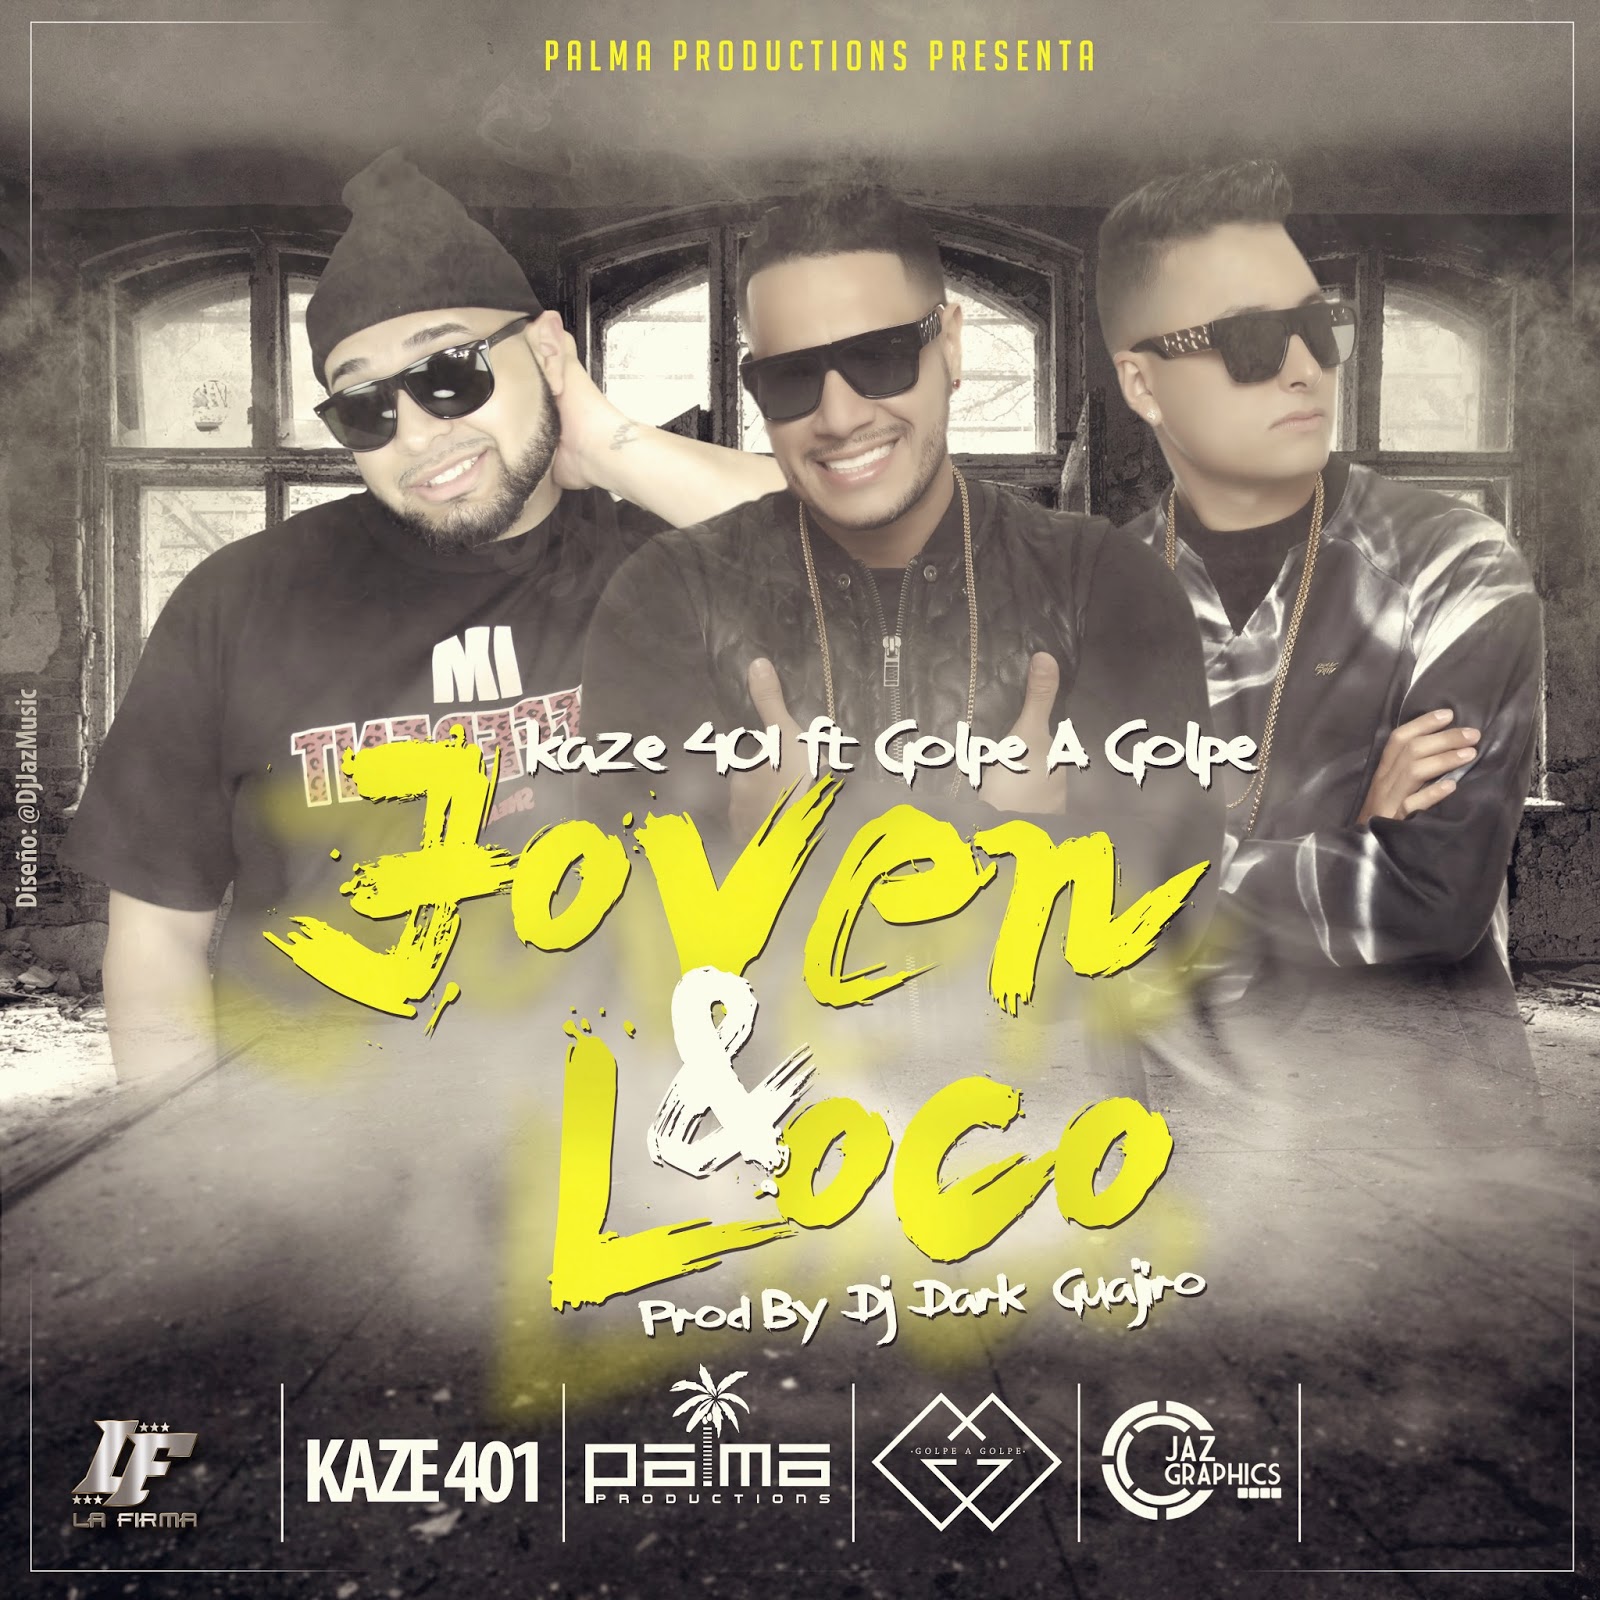 Joven Y Loco - Golpe A Golpe ft. Kaze401